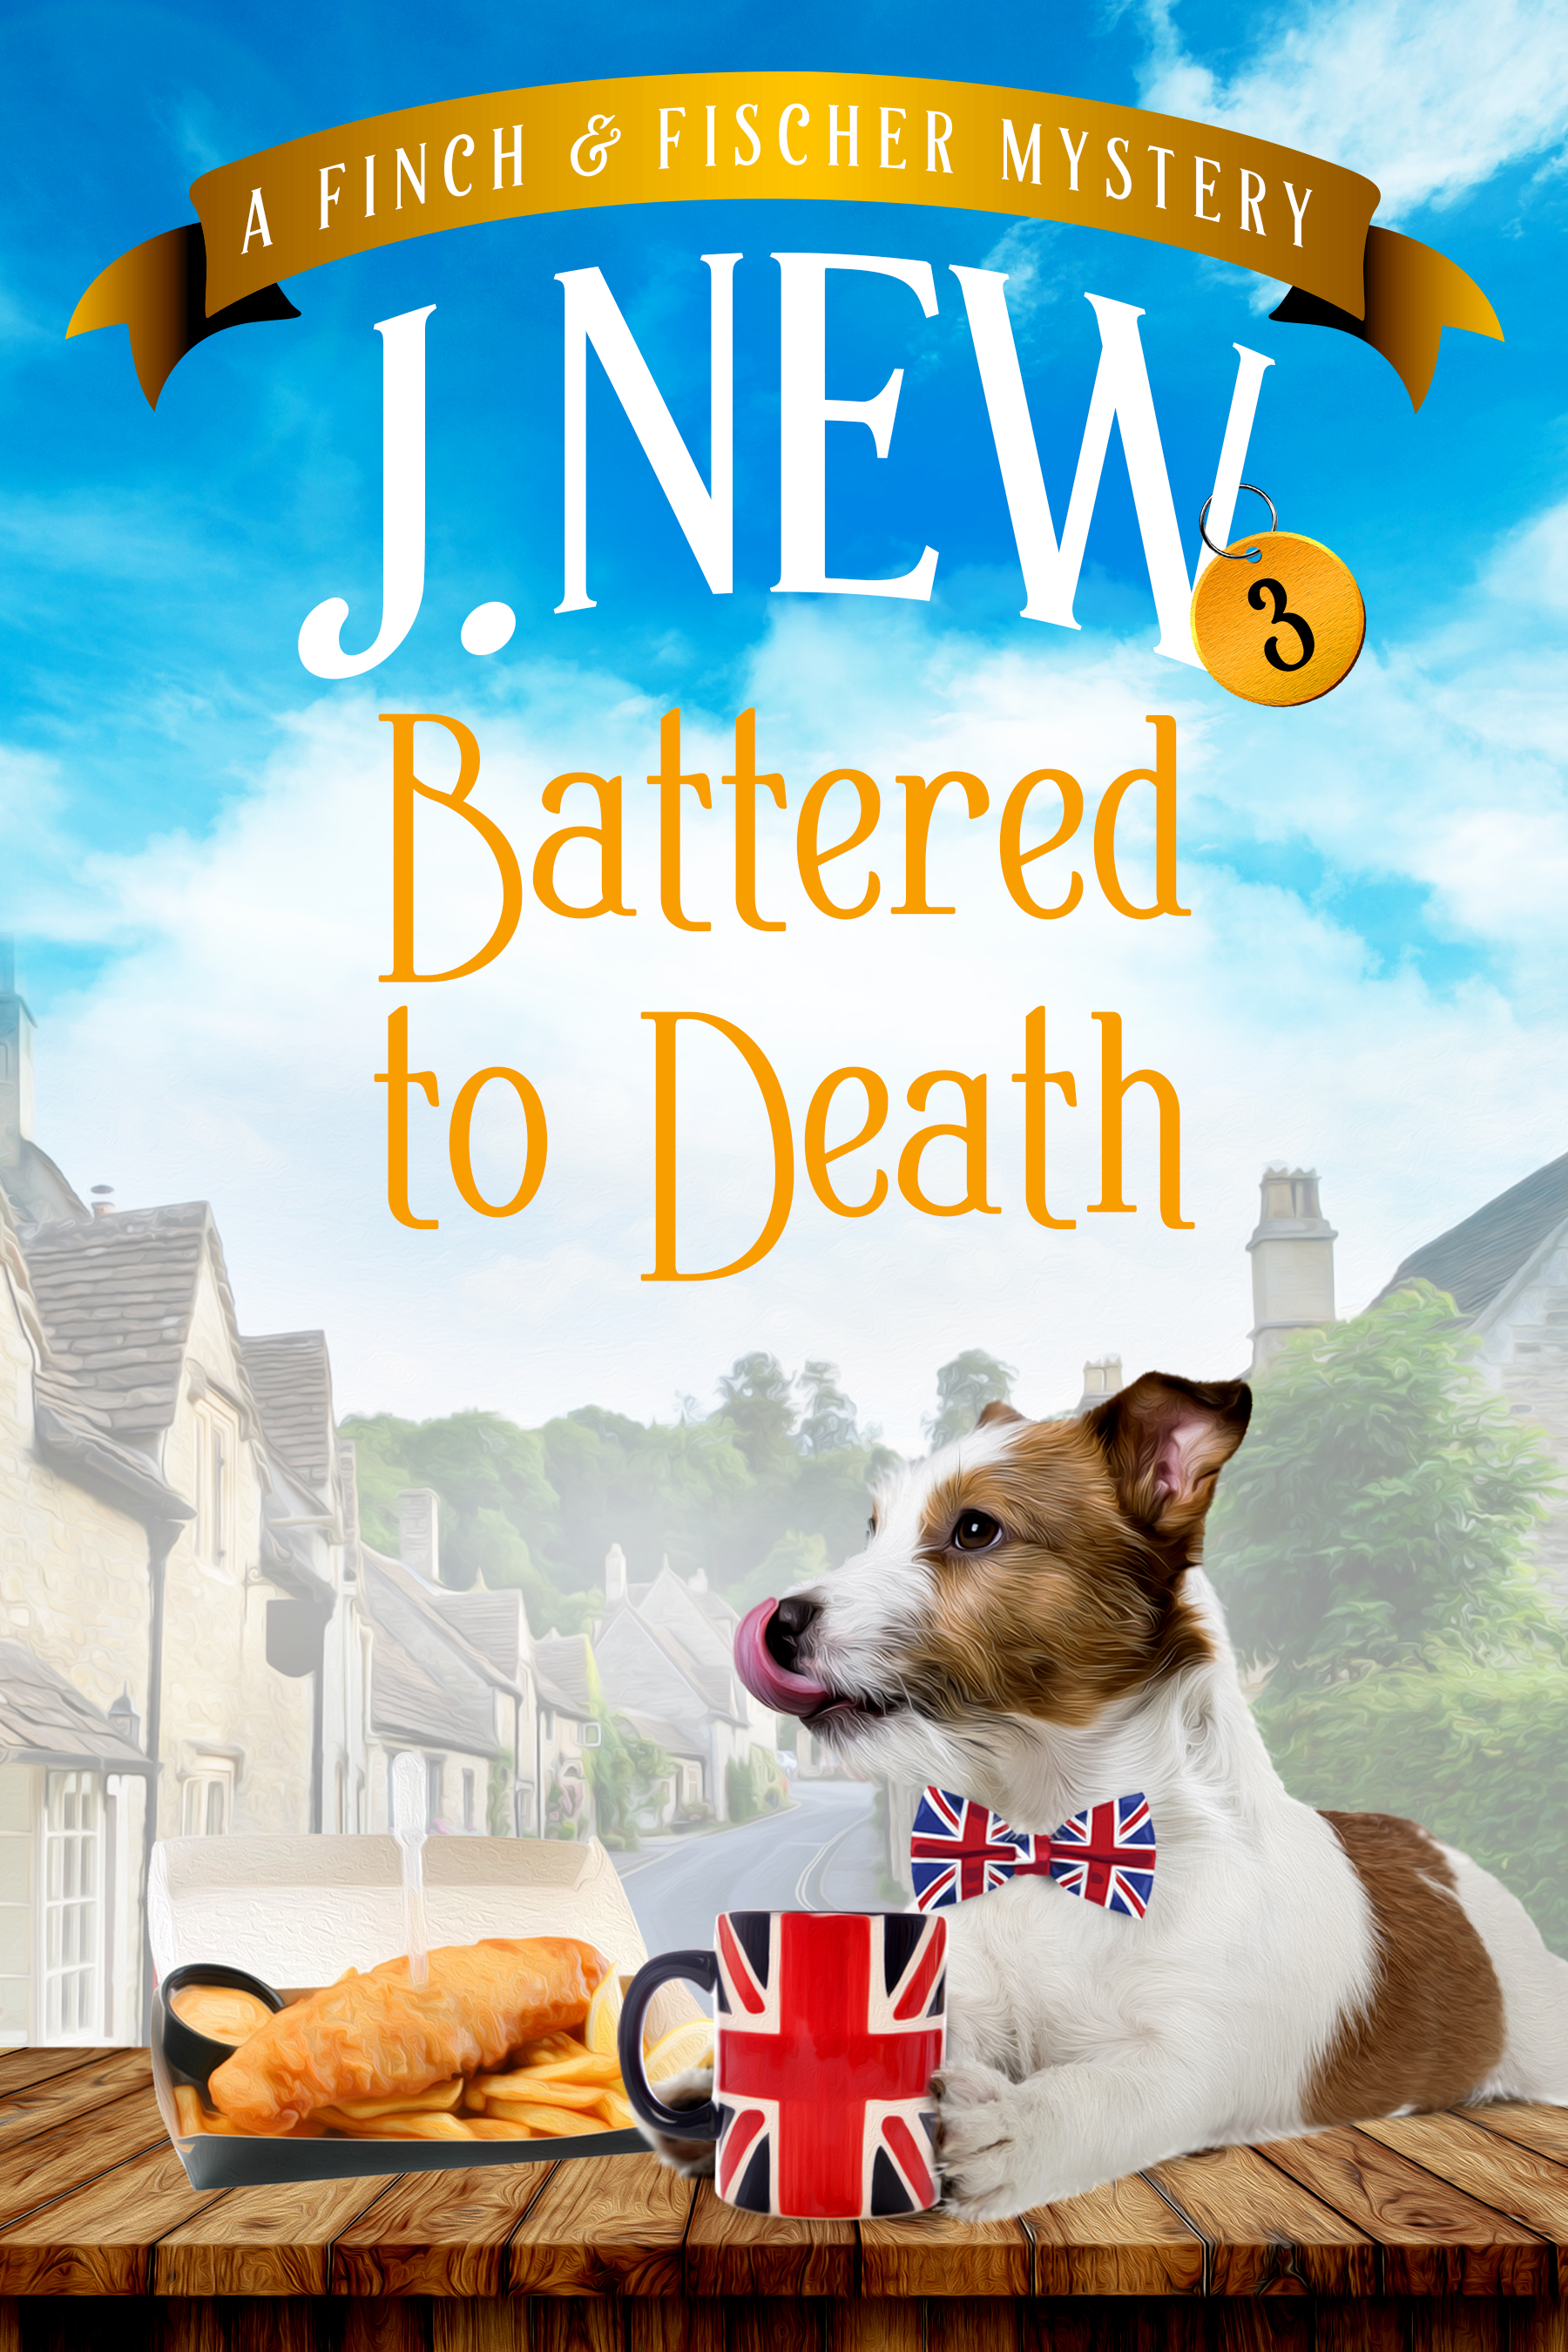 Battered to Death is the third book in the popular Finch and Fischer British cozy mystery series by author J. New